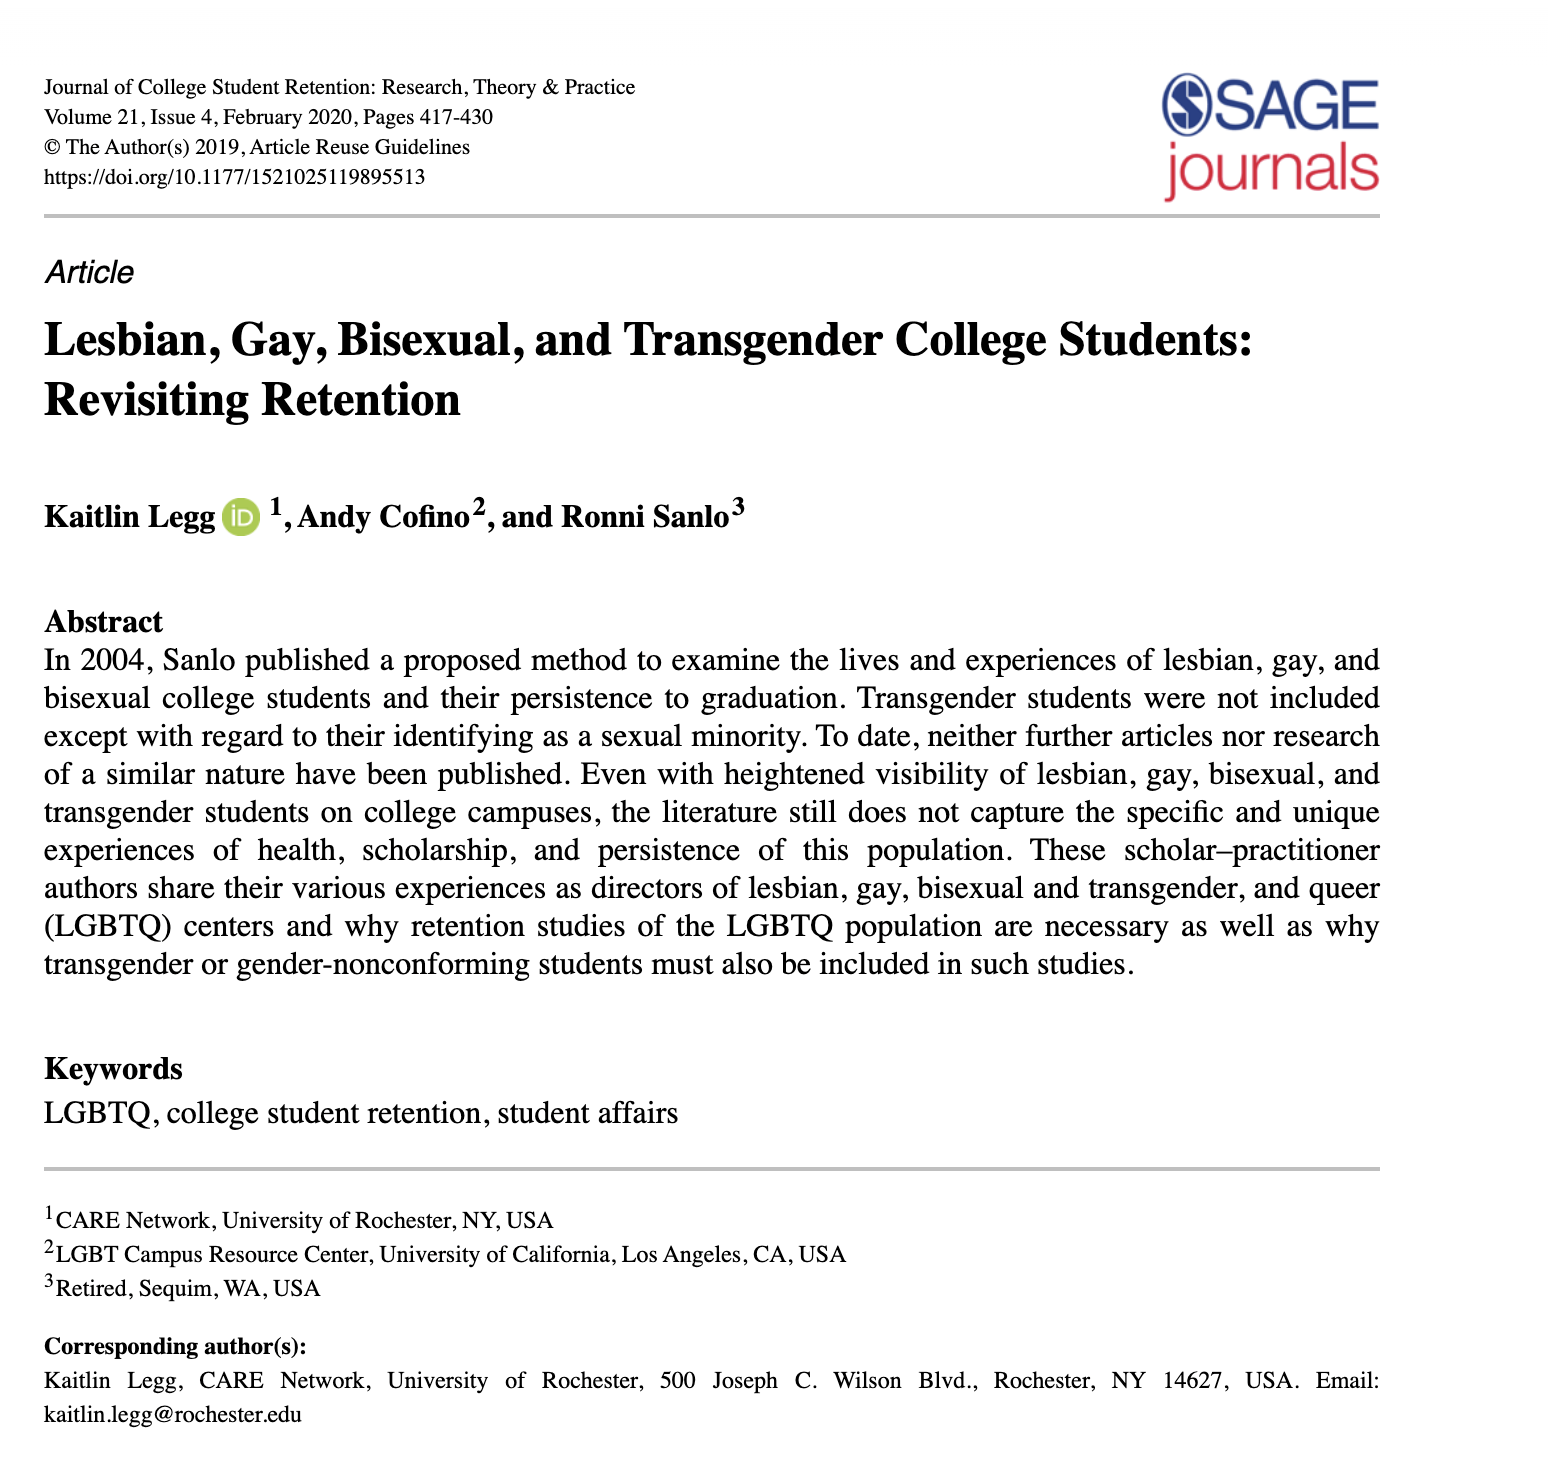 Journal Article – Lesbian, Gay, Bisexual, and Transgender College Students: Revisiting Retention